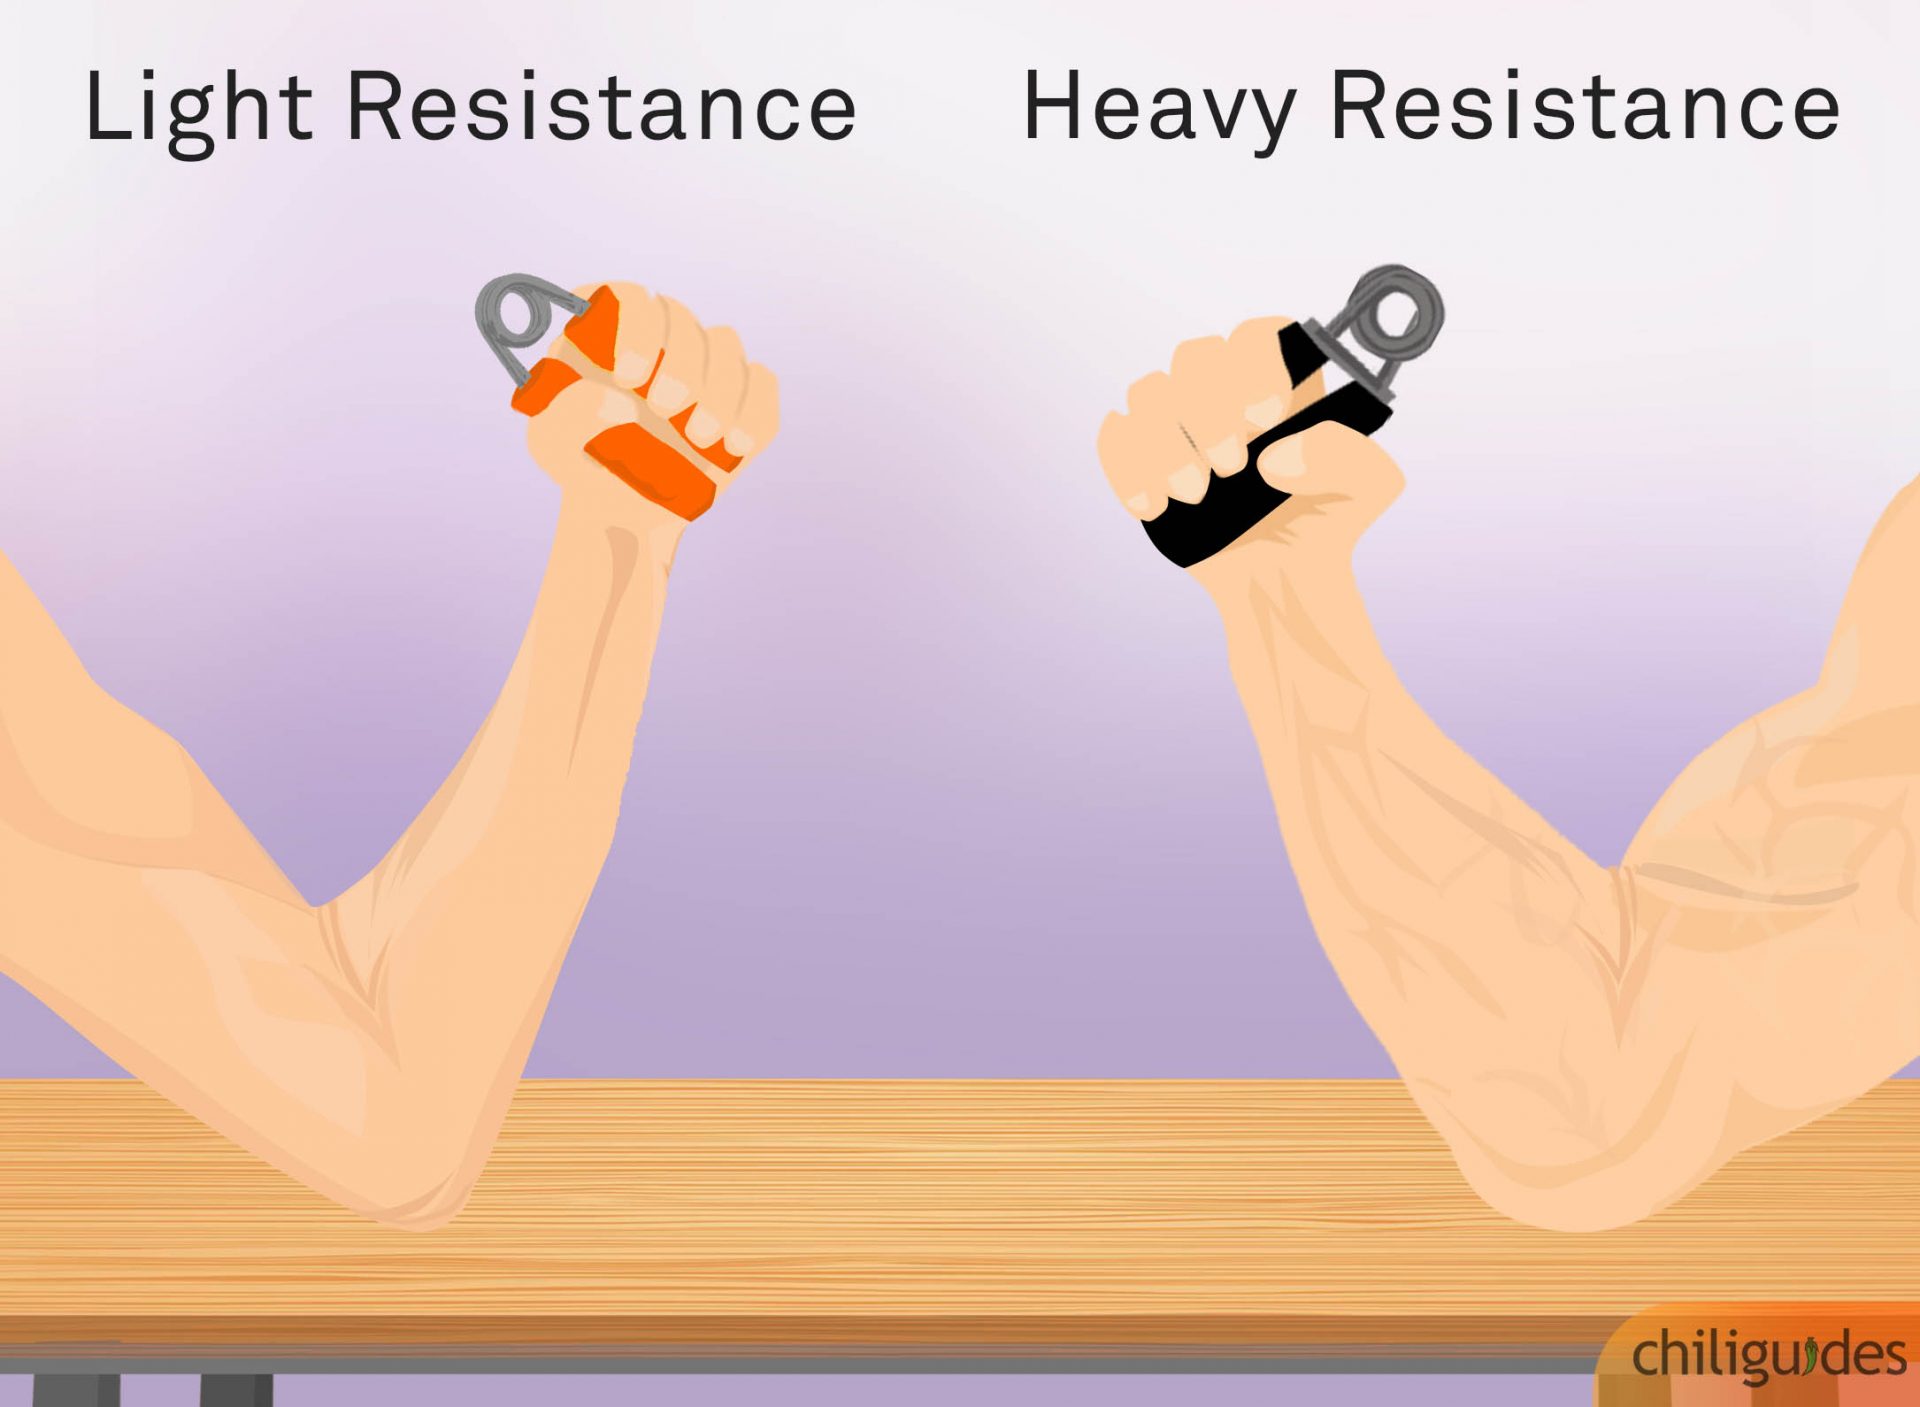 Pick heavy resistance for power and light for endurance.